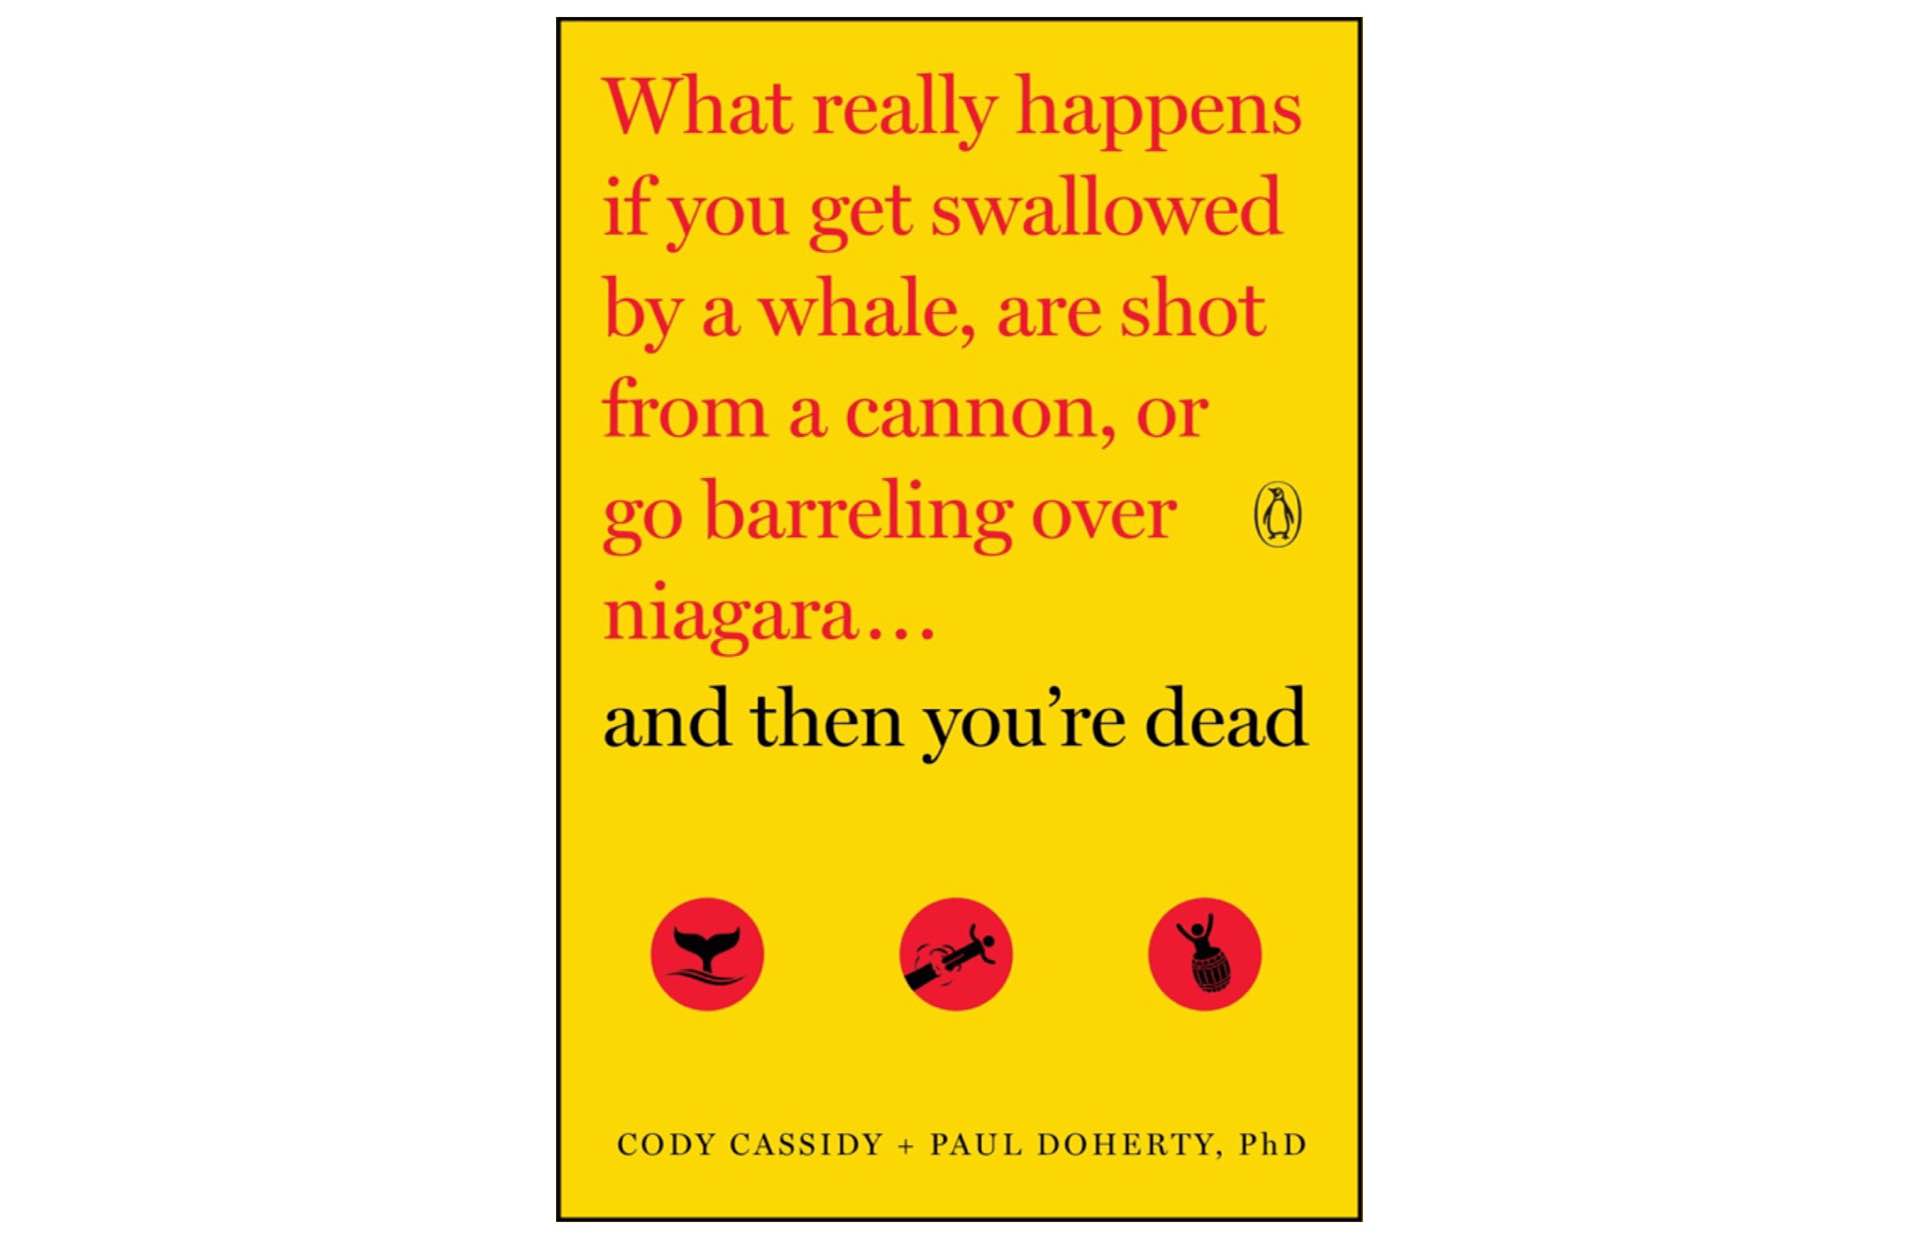 And Then You're Dead by Cody Cassidy and Paul Doherty. ($11 paperback)